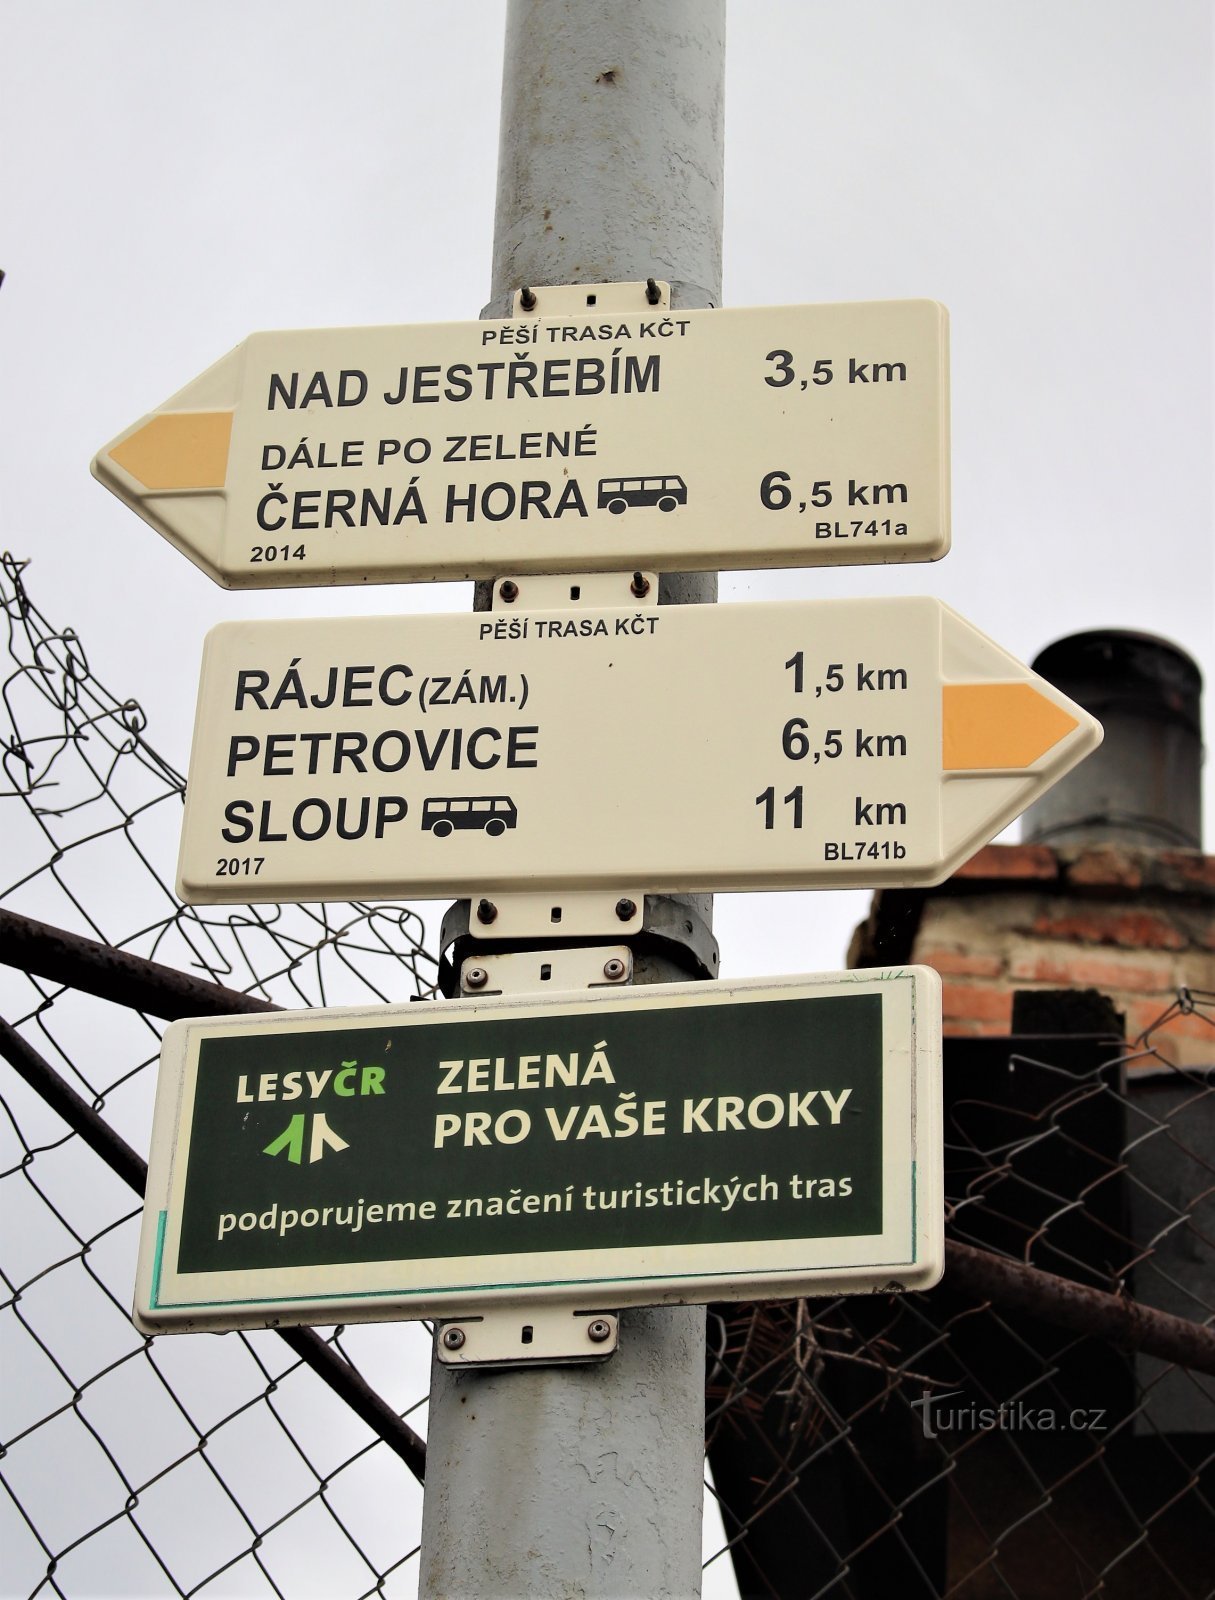 Directional signs at the tourist crossroads